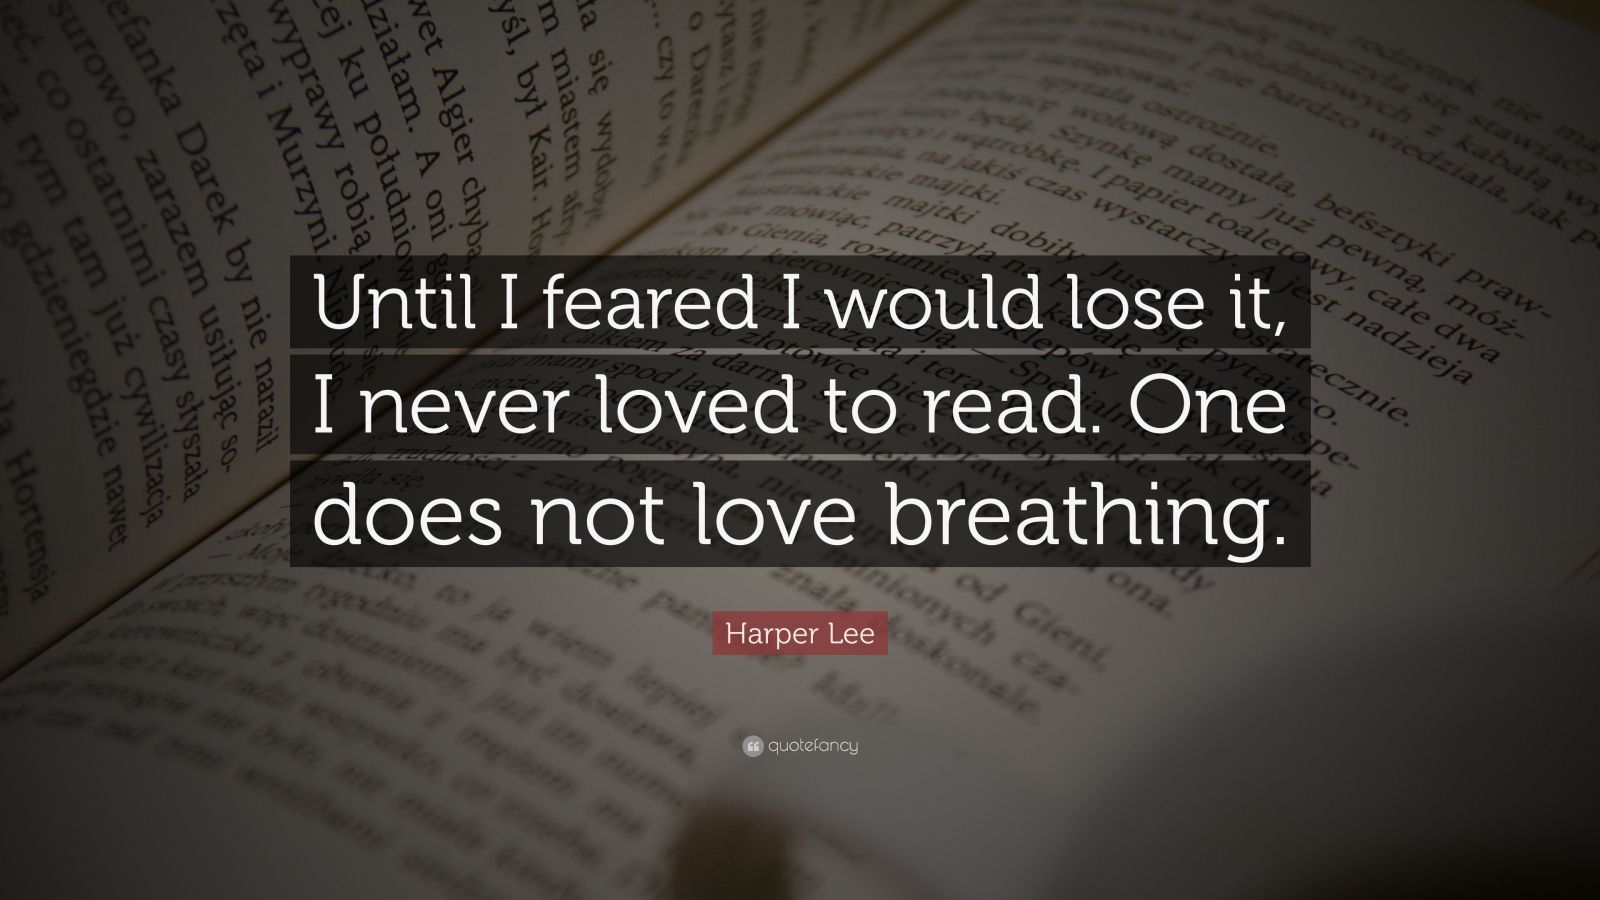 Harper Lee Quote “Until I feared I would lose it I never loved